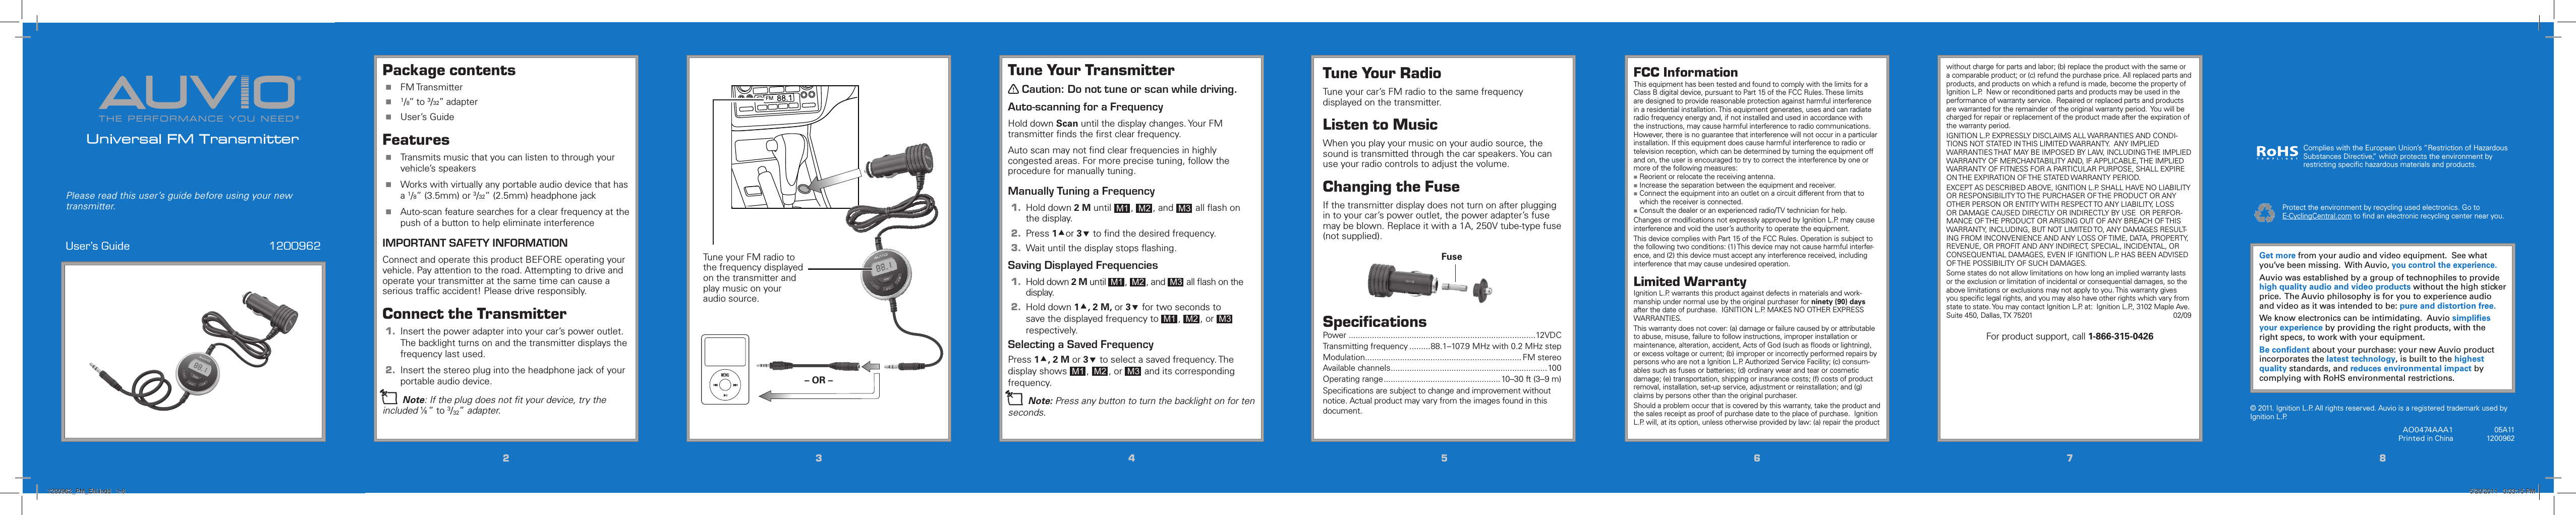 THE PERFORMANCE YOU NEED®®Universal FM TransmitterUser’s Guide  1200962Please read this user’s guide before using your new transmitter.22334455667788Tune Your RadioTune your car’s FM radio to the same frequency displayed on the transmitter.Listen to MusicWhen you play your music on your audio source, the sound is transmitted through the car speakers. You can use your radio controls to adjust the volume.Changing the FuseIf the transmitter display does not turn on after plugging in to your car’s power outlet, the power adapter’s fuse may be blown. Replace it with a 1A, 250V tube-type fuse (not supplied).SpeciﬁcationsPower ................................................................................12VDCTransmitting frequency .........88.1–107.9 MHz with 0.2 MHz stepModulation ................................................................... FM stereoAvailable channels ...................................................................100Operating range ..................................................10–30 ft (3–9 m)Speciﬁcations are subject to change and improvement without notice. Actual product may vary from the images found in this document.Tune Your Transmitterw Caution: Do not tune or scan while driving.Auto-scanning for a FrequencyHold down Scan until the display changes. Your FM transmitter ﬁnds the ﬁrst clear frequency.Auto scan may not ﬁnd clear frequencies in highly congested areas. For more precise tuning, follow the procedure for manually tuning.Manually Tuning a Frequency1.  Hold down 2 M until  M1 ,  M2 , and  M3  all ﬂash on the display.2.  Press 1or 3 to ﬁnd the desired frequency.3.  Wait until the display stops ﬂashing.Saving Displayed Frequencies1.  Hold down 2 M until  M1 ,  M2 , and  M3  all ﬂash on the display.2.  Hold down 1, 2 M, or 3 for two seconds to save the displayed frequency to  M1 ,  M2 , or  M3  respectively. Selecting a Saved FrequencyPress 1, 2 M or 3 to select a saved frequency. The display shows  M1 ,  M2 , or  M3  and its corresponding frequency.n Note: Press any button to turn the backlight on for ten seconds.Package contents FM Transmitter  1/8’’ to 3/32’’ adapter User’s GuideFeatures Transmits music that you can listen to through your vehicle’s speakers Works with virtually any portable audio device that has a 1/8” (3.5mm) or 3/32” (2.5mm) headphone jack Auto-scan feature searches for a clear frequency at the push of a button to help eliminate interferenceIMPORTANT SAFETY INFORMATIONConnect and operate this product BEFORE operating your vehicle. Pay attention to the road. Attempting to drive and operate your transmitter at the same time can cause a serious trafﬁc accident! Please drive responsibly.Connect the Transmitter1.  Insert the power adapter into your car’s power outlet. The backlight turns on and the transmitter displays the frequency last used.2.  Insert the stereo plug into the headphone jack of your portable audio device.n Note: If the plug does not ﬁt your device, try the included Ç” to 3/32” adapter.FCC InformationThis equipment has been tested and found to comply with the limits for a Class B digital device, pursuant to Part 15 of the FCC Rules. These limits are designed to provide reasonable protection against harmful interference in a residential installation. This equipment generates, uses and can radiate radio frequency energy and, if not installed and used in accordance with the instructions, may cause harmful interference to radio communications. However, there is no guarantee that interference will not occur in a particular installation. If this equipment does cause harmful interference to radio or television reception, which can be determined by turning the equipment off and on, the user is encouraged to try to correct the interference by one or more of the following measures: Reorient or relocate the receiving antenna. Increase the separation between the equipment and receiver. Connect the equipment into an outlet on a circuit different from that to which the receiver is connected. Consult the dealer or an experienced radio/TV technician for help.Changes or modiﬁcations not expressly approved by Ignition L.P. may cause interference and void the user’s authority to operate the equipment.This device complies with Part 15 of the FCC Rules. Operation is subject to the following two conditions: (1) This device may not cause harmful interfer-ence, and (2) this device must accept any interference received, including interference that may cause undesired operation.Limited WarrantyIgnition L.P. warrants this product against defects in materials and work-manship under normal use by the original purchaser for ninety (90) days after the date of purchase.  IGNITION L.P. MAKES NO OTHER EXPRESS WARRANTIES.This warranty does not cover: (a) damage or failure caused by or attributable to abuse, misuse, failure to follow instructions, improper installation or maintenance, alteration, accident, Acts of God (such as ﬂoods or lightning), or excess voltage or current; (b) improper or incorrectly performed repairs by persons who are not a Ignition L.P. Authorized Service Facility; (c) consum-ables such as fuses or batteries; (d) ordinary wear and tear or cosmetic damage; (e) transportation, shipping or insurance costs; (f) costs of product removal, installation, set-up service, adjustment or reinstallation; and (g) claims by persons other than the original purchaser.Should a problem occur that is covered by this warranty, take the product and the sales receipt as proof of purchase date to the place of purchase.  Ignition L.P. will, at its option, unless otherwise provided by law: (a) repair the product without charge for parts and labor; (b) replace the product with the same or a comparable product; or (c) refund the purchase price. All replaced parts and products, and products on which a refund is made, become the property of Ignition L.P.  New or reconditioned parts and products may be used in the performance of warranty service.  Repaired or replaced parts and products are warranted for the remainder of the original warranty period.  You will be charged for repair or replacement of the product made after the expiration of the warranty period.IGNITION L.P. EXPRESSLY DISCLAIMS ALL WARRANTIES AND CONDI-TIONS NOT STATED IN THIS LIMITED WARRANTY.  ANY IMPLIED WARRANTIES THAT MAY BE IMPOSED BY LAW, INCLUDING THE IMPLIED WARRANTY OF MERCHANTABILITY AND, IF APPLICABLE, THE IMPLIED WARRANTY OF FITNESS FOR A PARTICULAR PURPOSE, SHALL EXPIRE ON THE EXPIRATION OF THE STATED WARRANTY PERIOD. EXCEPT AS DESCRIBED ABOVE, IGNITION L.P. SHALL HAVE NO LIABILITY OR RESPONSIBILITY TO THE PURCHASER OF THE PRODUCT OR ANY OTHER PERSON OR ENTITY WITH RESPECT TO ANY LIABILITY, LOSS OR DAMAGE CAUSED DIRECTLY OR INDIRECTLY BY USE  OR PERFOR-MANCE OF THE PRODUCT OR ARISING OUT OF ANY BREACH OF THIS WARRANTY, INCLUDING, BUT NOT LIMITED TO, ANY DAMAGES RESULT-ING FROM INCONVENIENCE AND ANY LOSS OF TIME, DATA, PROPERTY, REVENUE, OR PROFIT AND ANY INDIRECT, SPECIAL, INCIDENTAL, OR CONSEQUENTIAL DAMAGES, EVEN IF IGNITION L.P. HAS BEEN ADVISED OF THE POSSIBILITY OF SUCH DAMAGES.Some states do not allow limitations on how long an implied warranty lasts or the exclusion or limitation of incidental or consequential damages, so the above limitations or exclusions may not apply to you. This warranty gives you speciﬁc legal rights, and you may also have other rights which vary from state to state. You may contact Ignition L.P. at:  Ignition L.P., 3102 Maple Ave. Suite 450, Dallas, TX 75201         02/09For product support, call 1-866-315-0426AO0474AAA1 Printed in China05A111200962Get more from your audio and video equipment.  See what you’ve been missing.  With Auvio, you control the experience.Auvio was established by a group of technophiles to provide high quality audio and video products without the high sticker price.  The Auvio philosophy is for you to experience audio and video as it was intended to be: pure and distortion free.  We know electronics can be intimidating.  Auvio simpliﬁes your experience by providing the right products, with the right specs, to work with your equipment.  Be conﬁdent about your purchase: your new Auvio product incorporates the latest technology, is built to the highest quality standards, and reduces environmental impact by complying with RoHS environmental restrictions.Protect the environment by recycling used electronics. Go to E-CyclingCentral.com to ﬁnd an electronic recycling center near you.© 2011. Ignition L.P. All rights reserved. Auvio is a registered trademark used by Ignition L.P. Complies with the European Union’s “Restriction of Hazardous Substances Directive,” which protects the environment by restricting speciﬁc hazardous materials and products.FuseTune your FM radio to the frequency displayed on the transmitter and play music on your audio source.– OR –1200962_PM_EN.indd   1-8 5/20/2011   3:33:15 PM